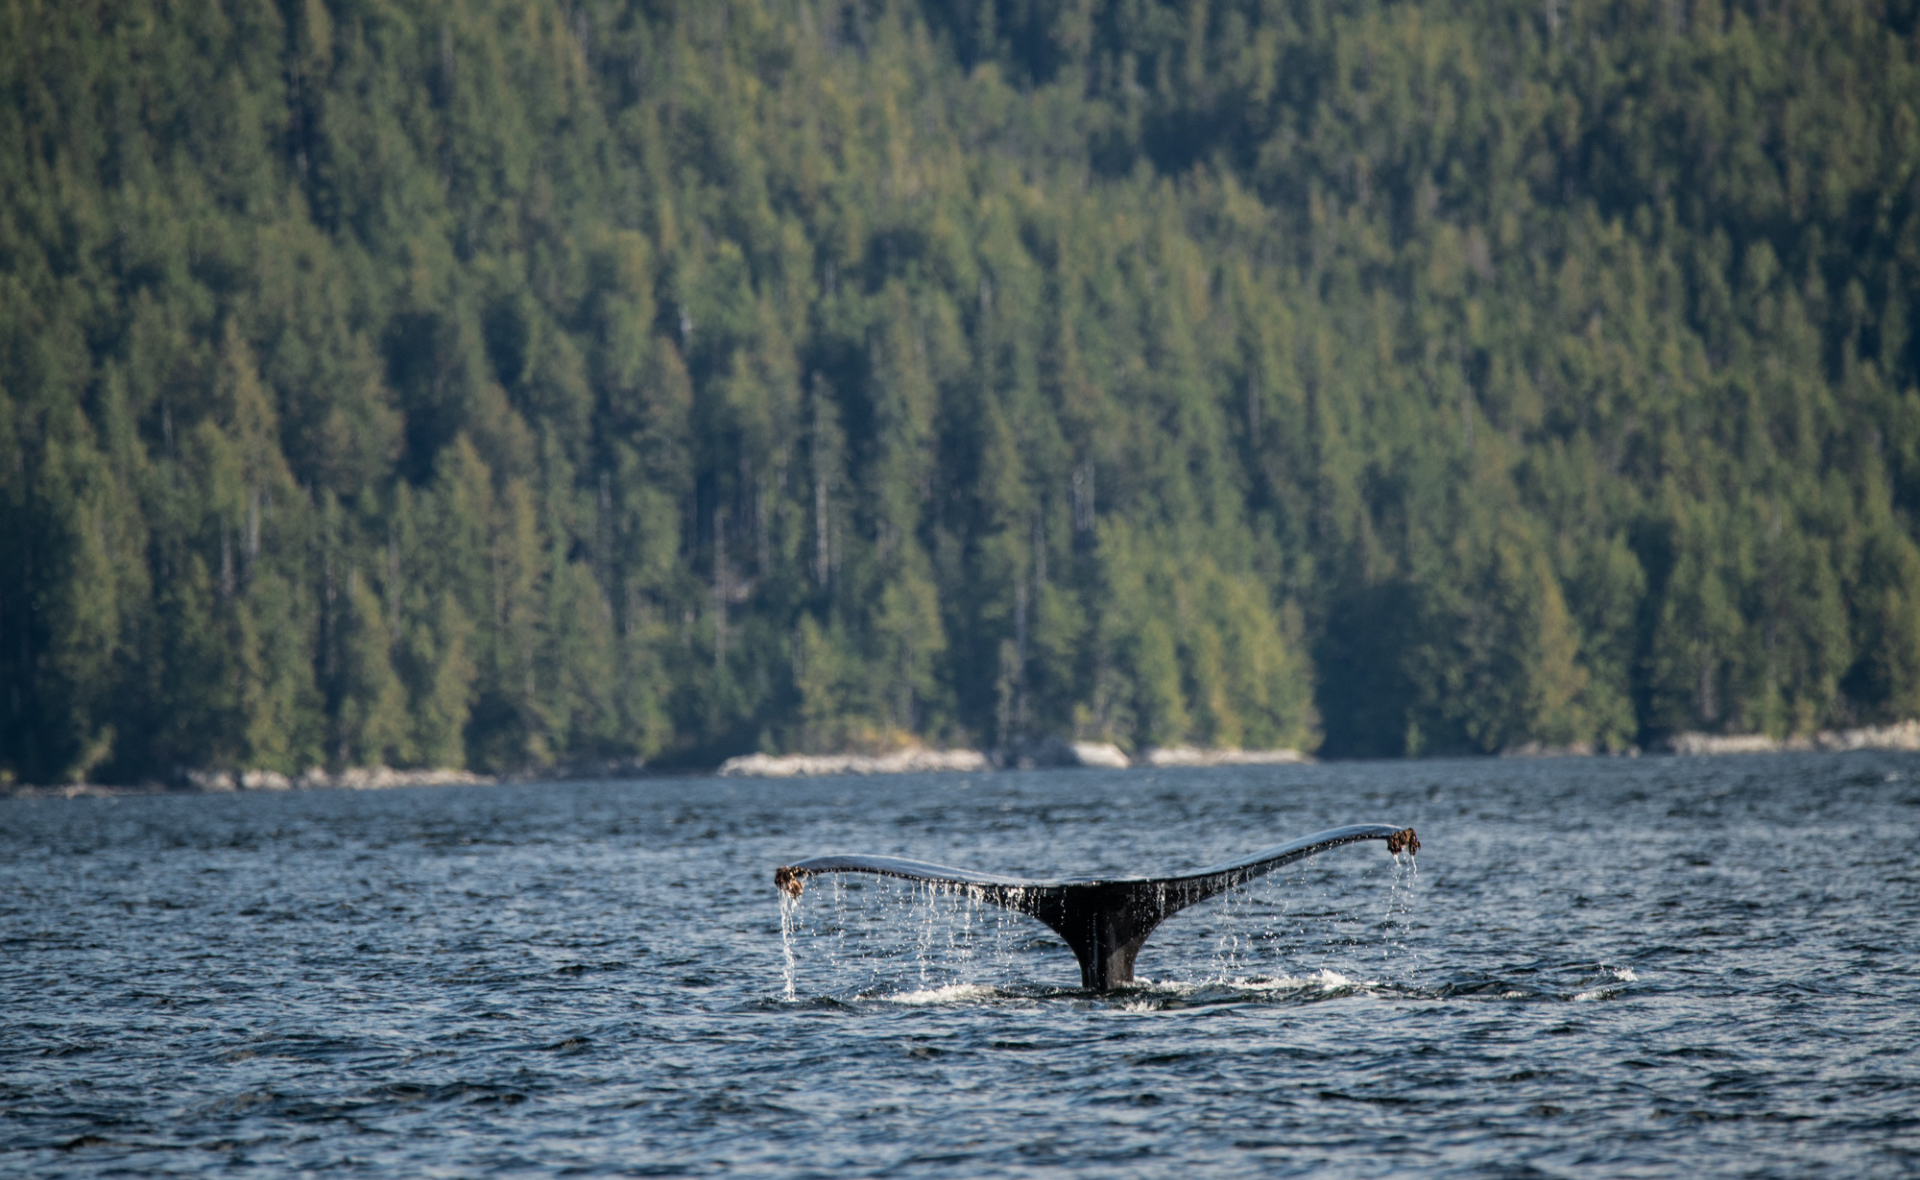 A whale tail emerges from a body of water. In the background is a large coniferous forest on a mountainside.